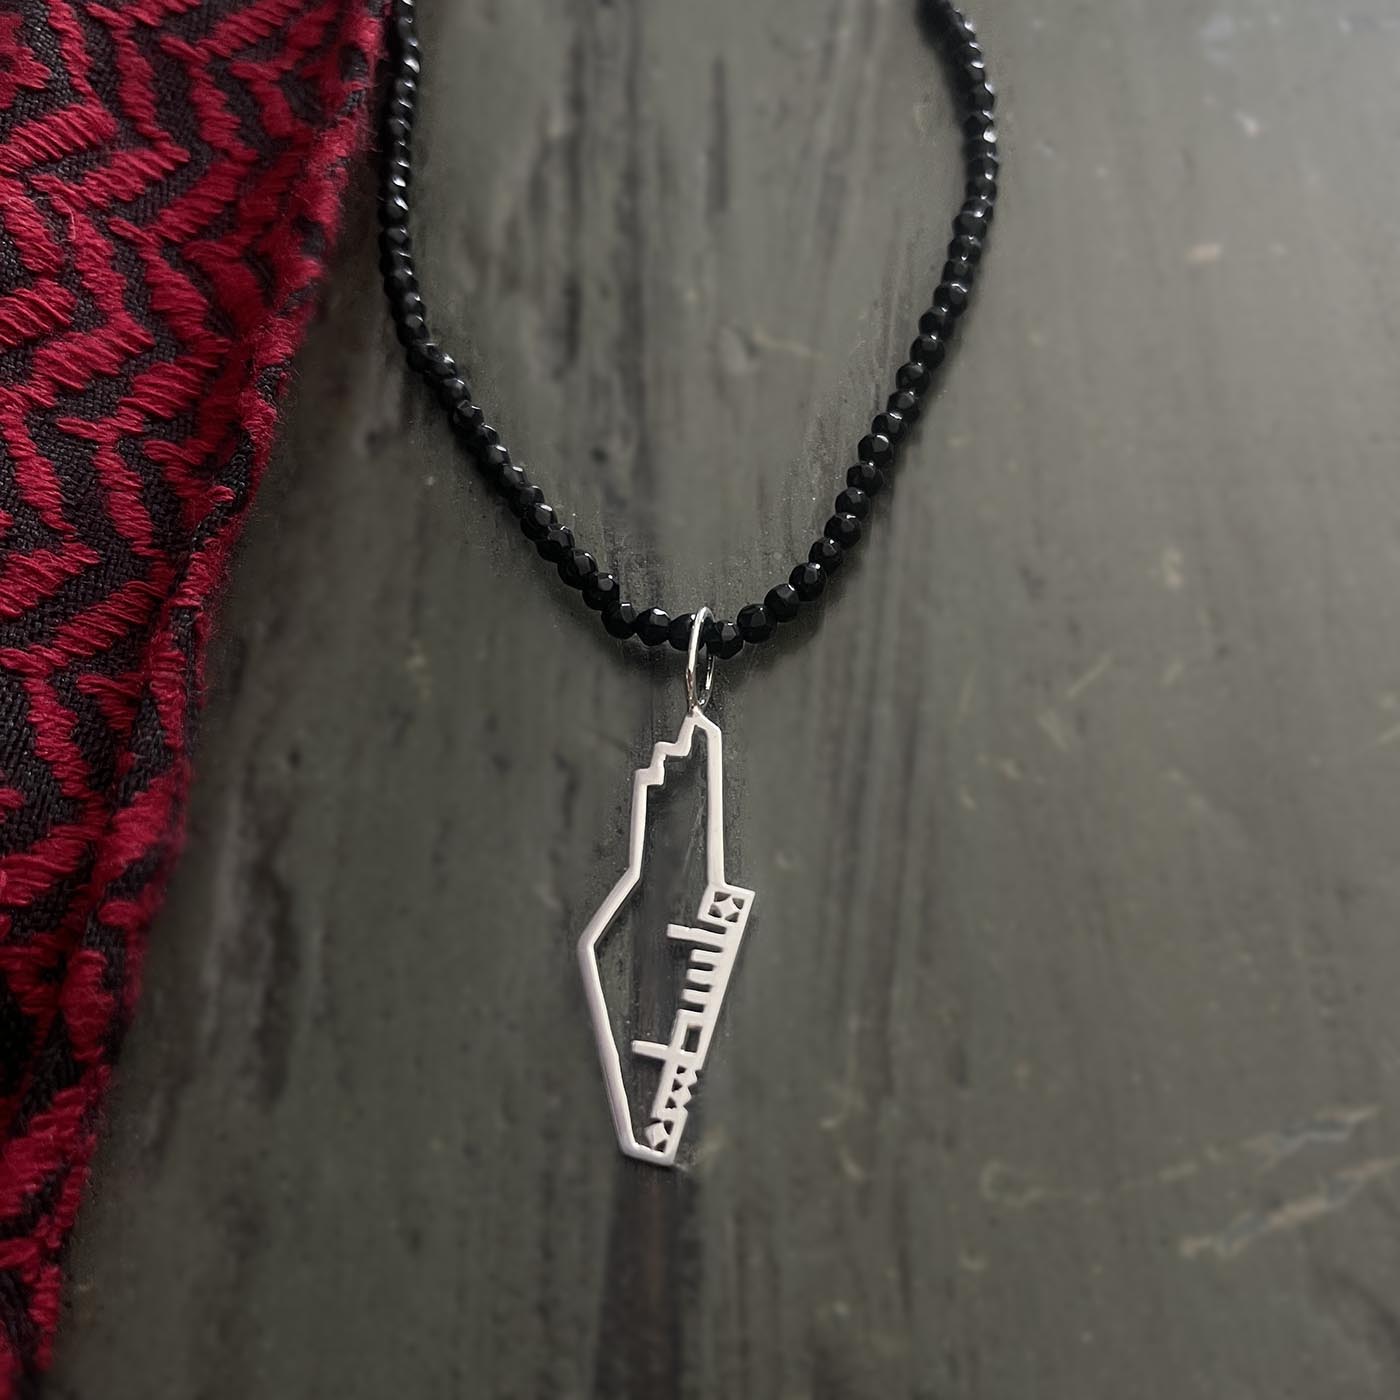 Palestine Silver Beads Necklace